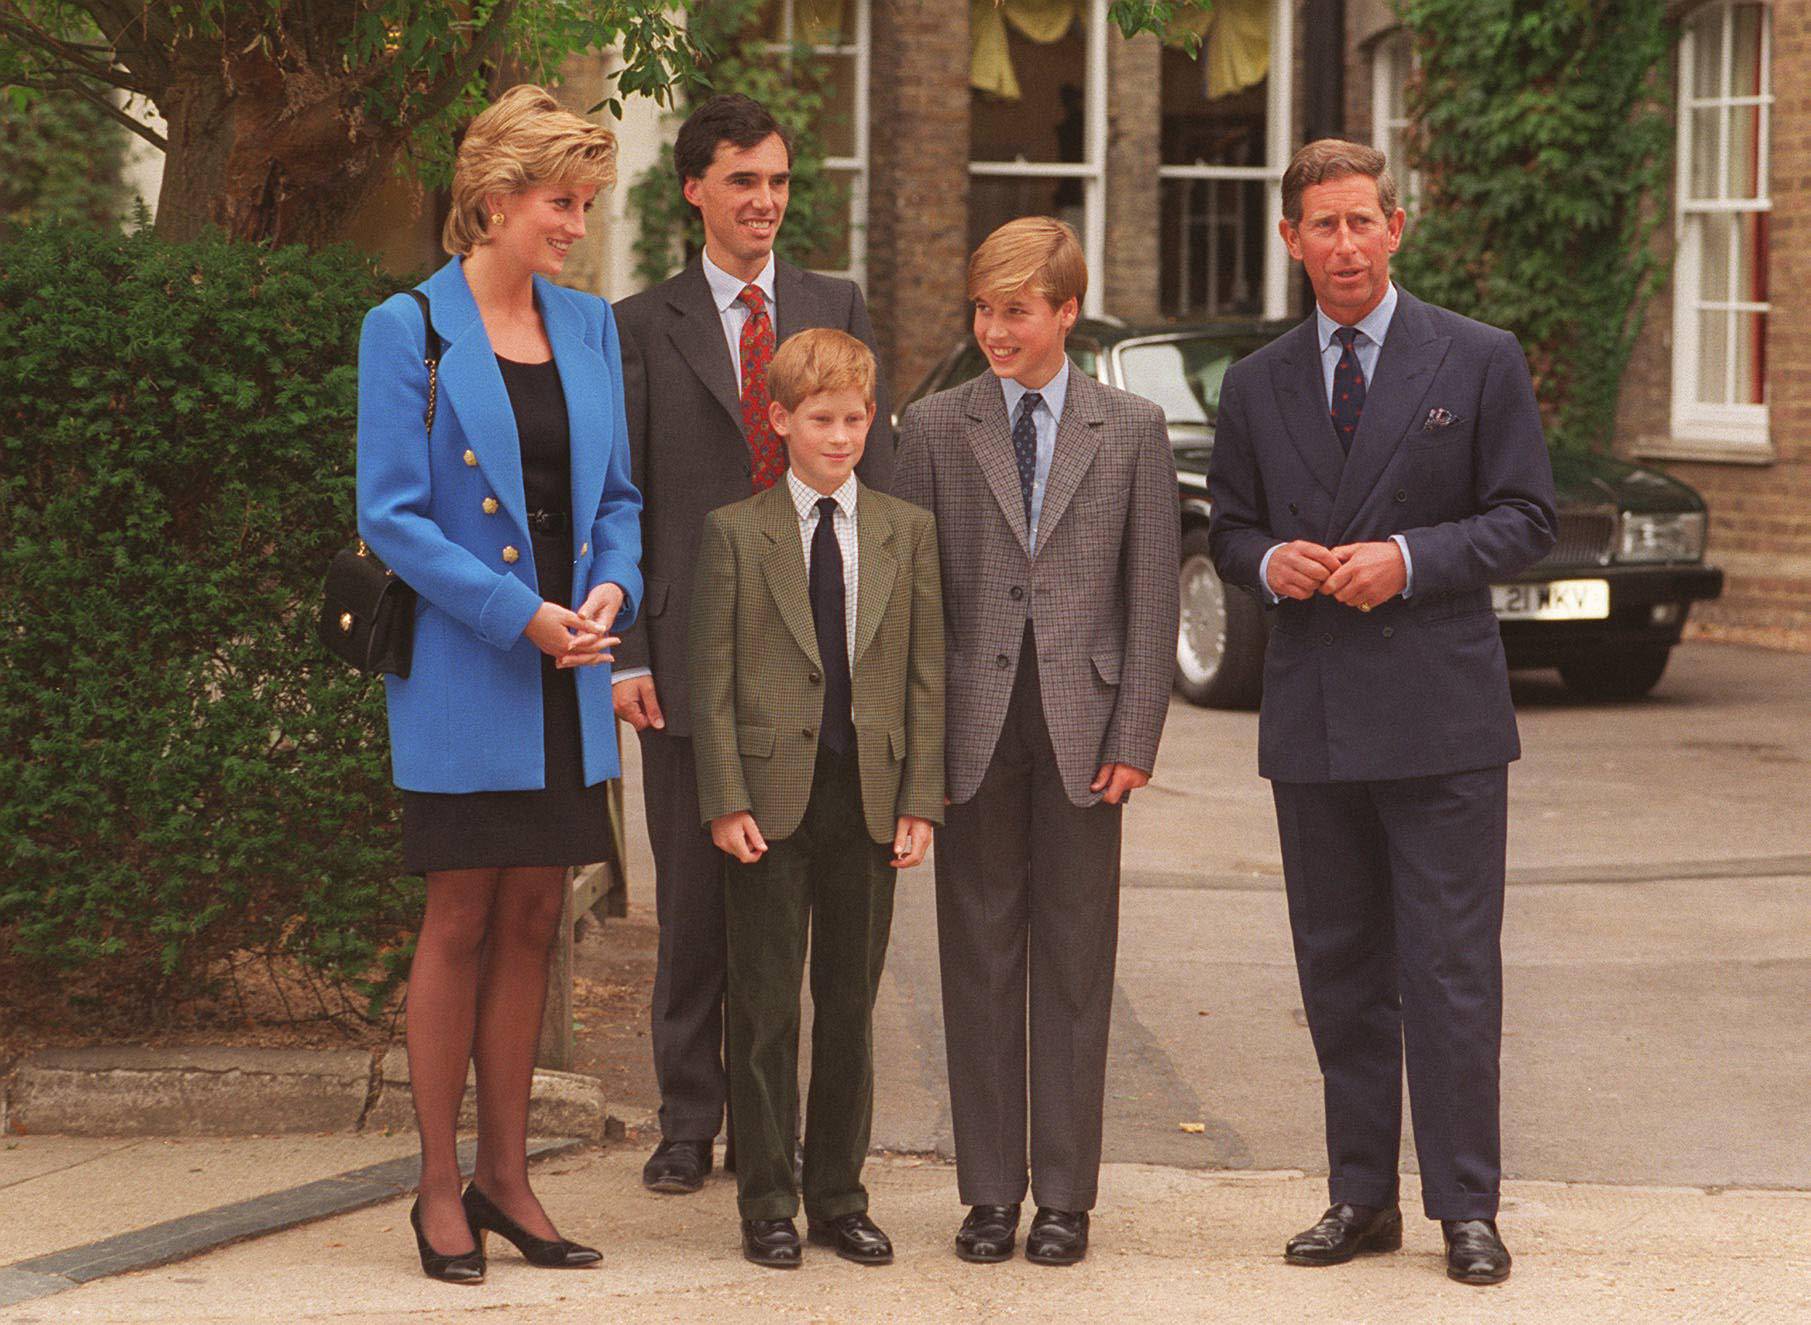 From Left to Right:-HRH PRINCESS OF WALES(HRH Princess Diana):HRH PRINCE HARRY:HRH PRINCE WILLIAM:HRH PRINCE OF WALES(HRH Prince Charles).(Seen on Prince William'sfirst day at Eton College)COMPULSORY CREDIT: UPPA/PhotoshotPhoto UGL 010